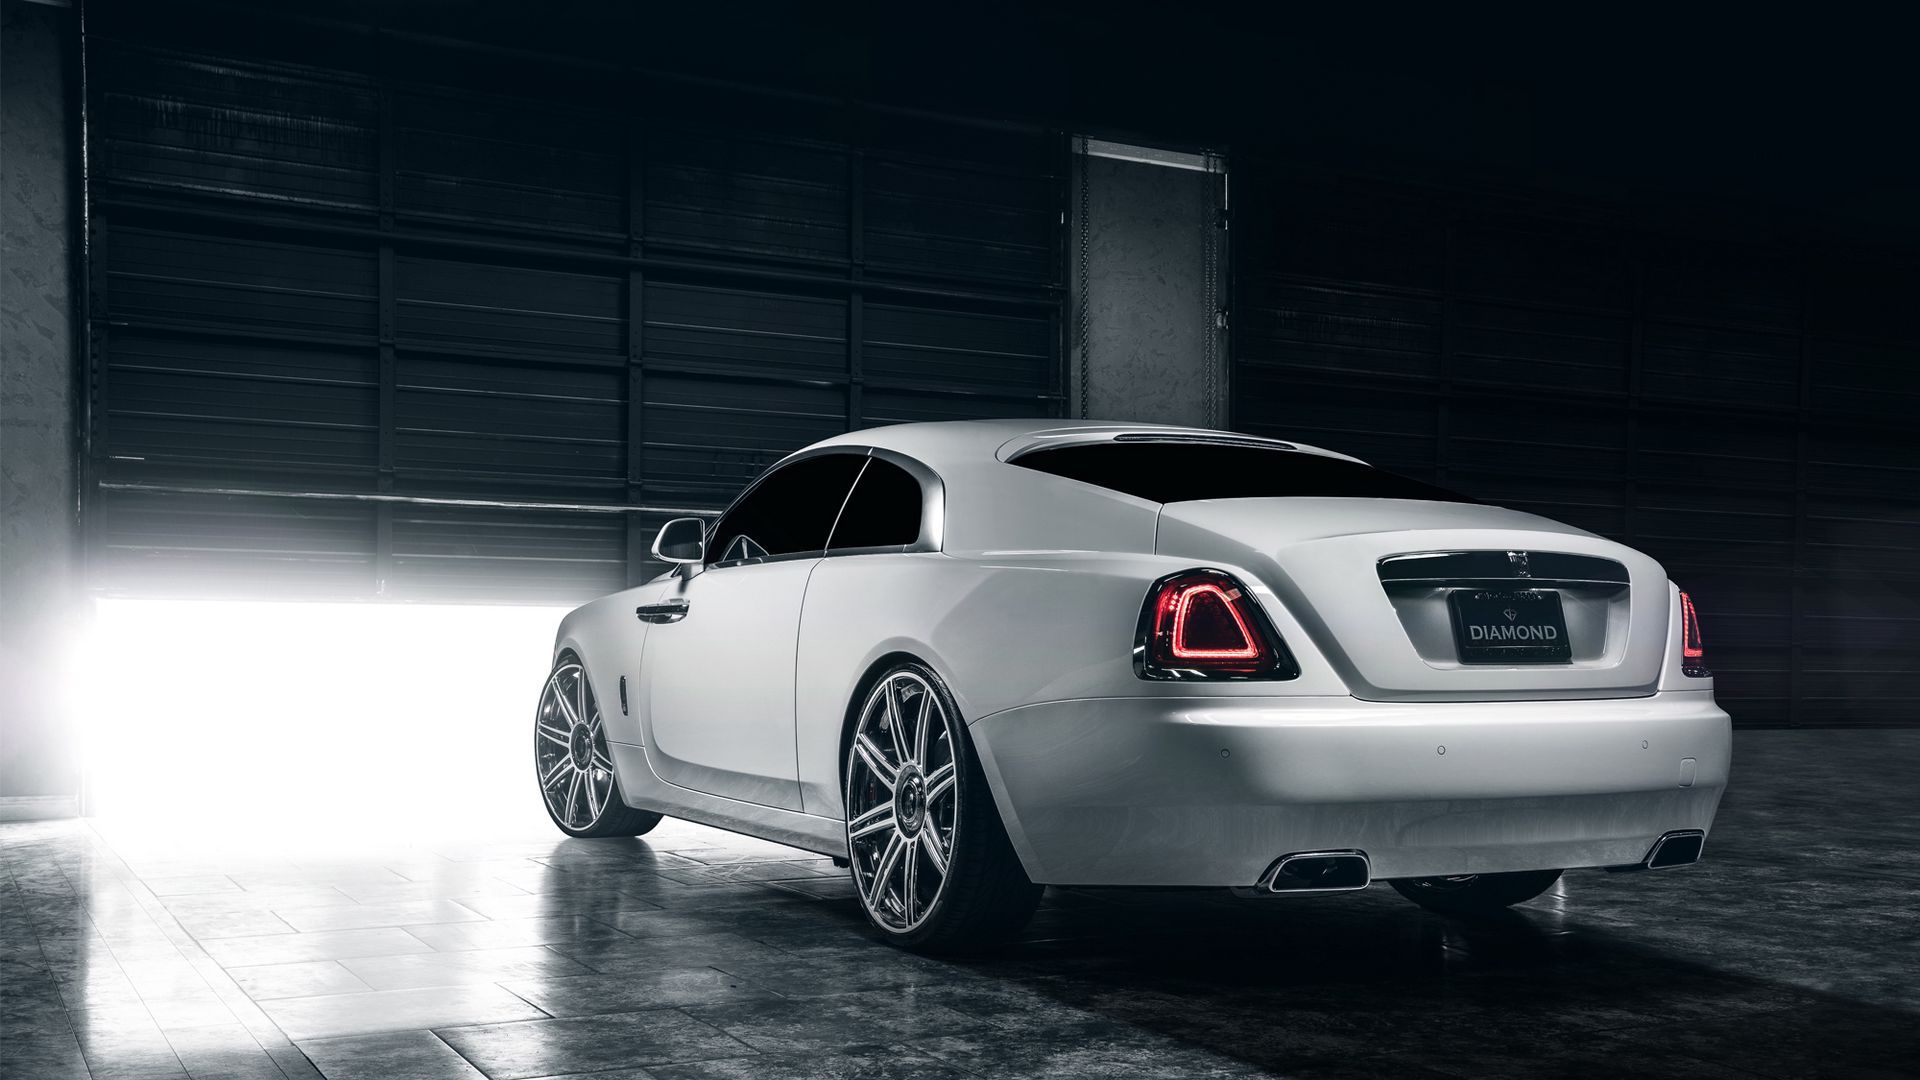 Download wallpaper 1920x1080 rolls royce, wraith, white, rear view full hd, hdtv, fhd, 1080p HD background